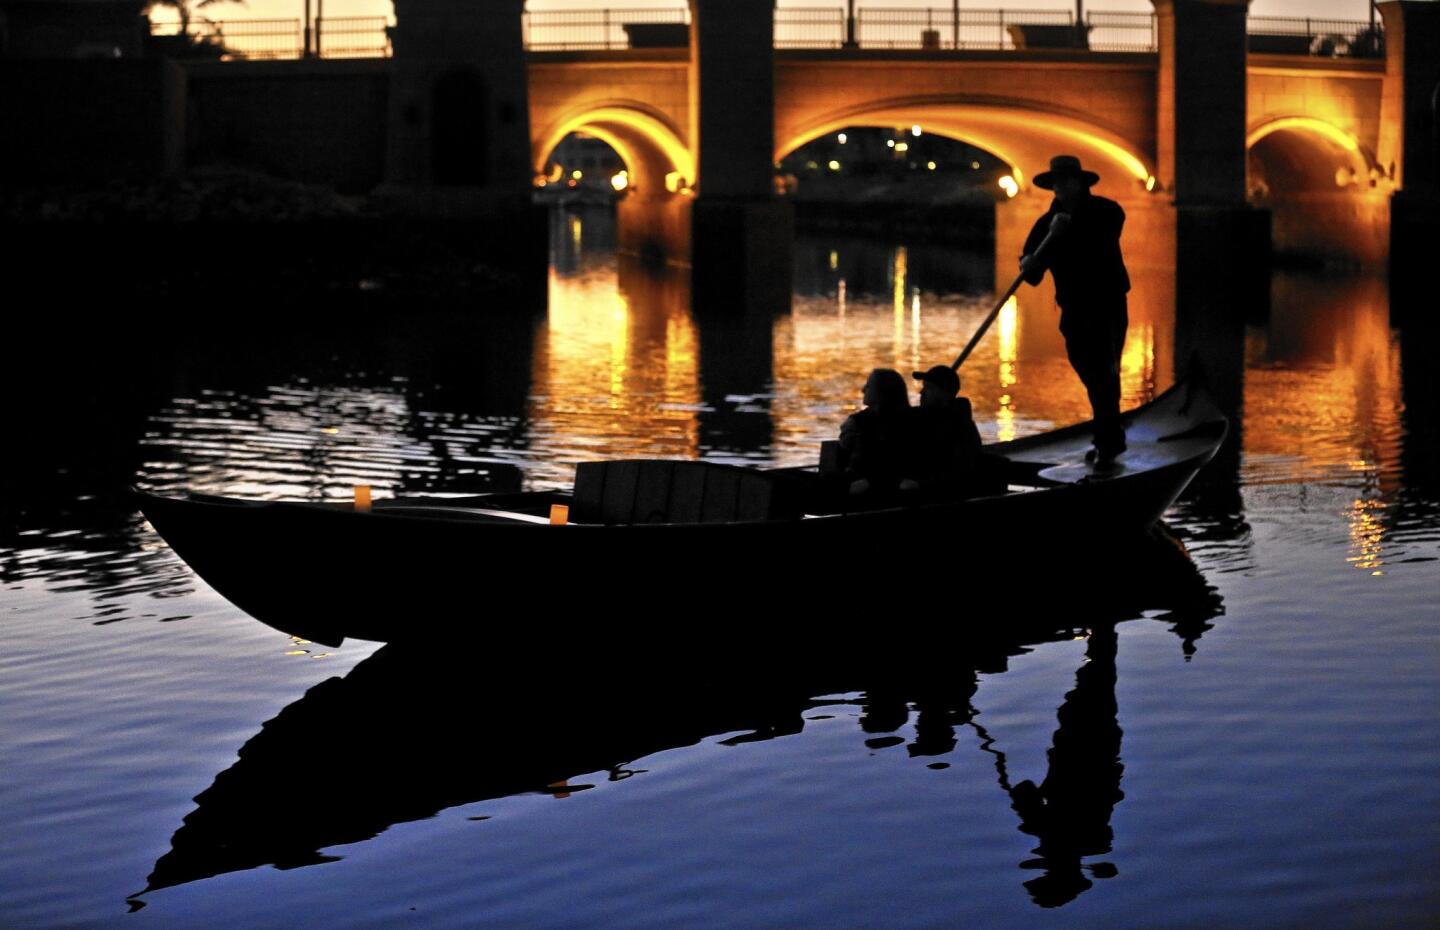 Visitors to Oxnard can take a gondola ride in Channel Islands Harbor.